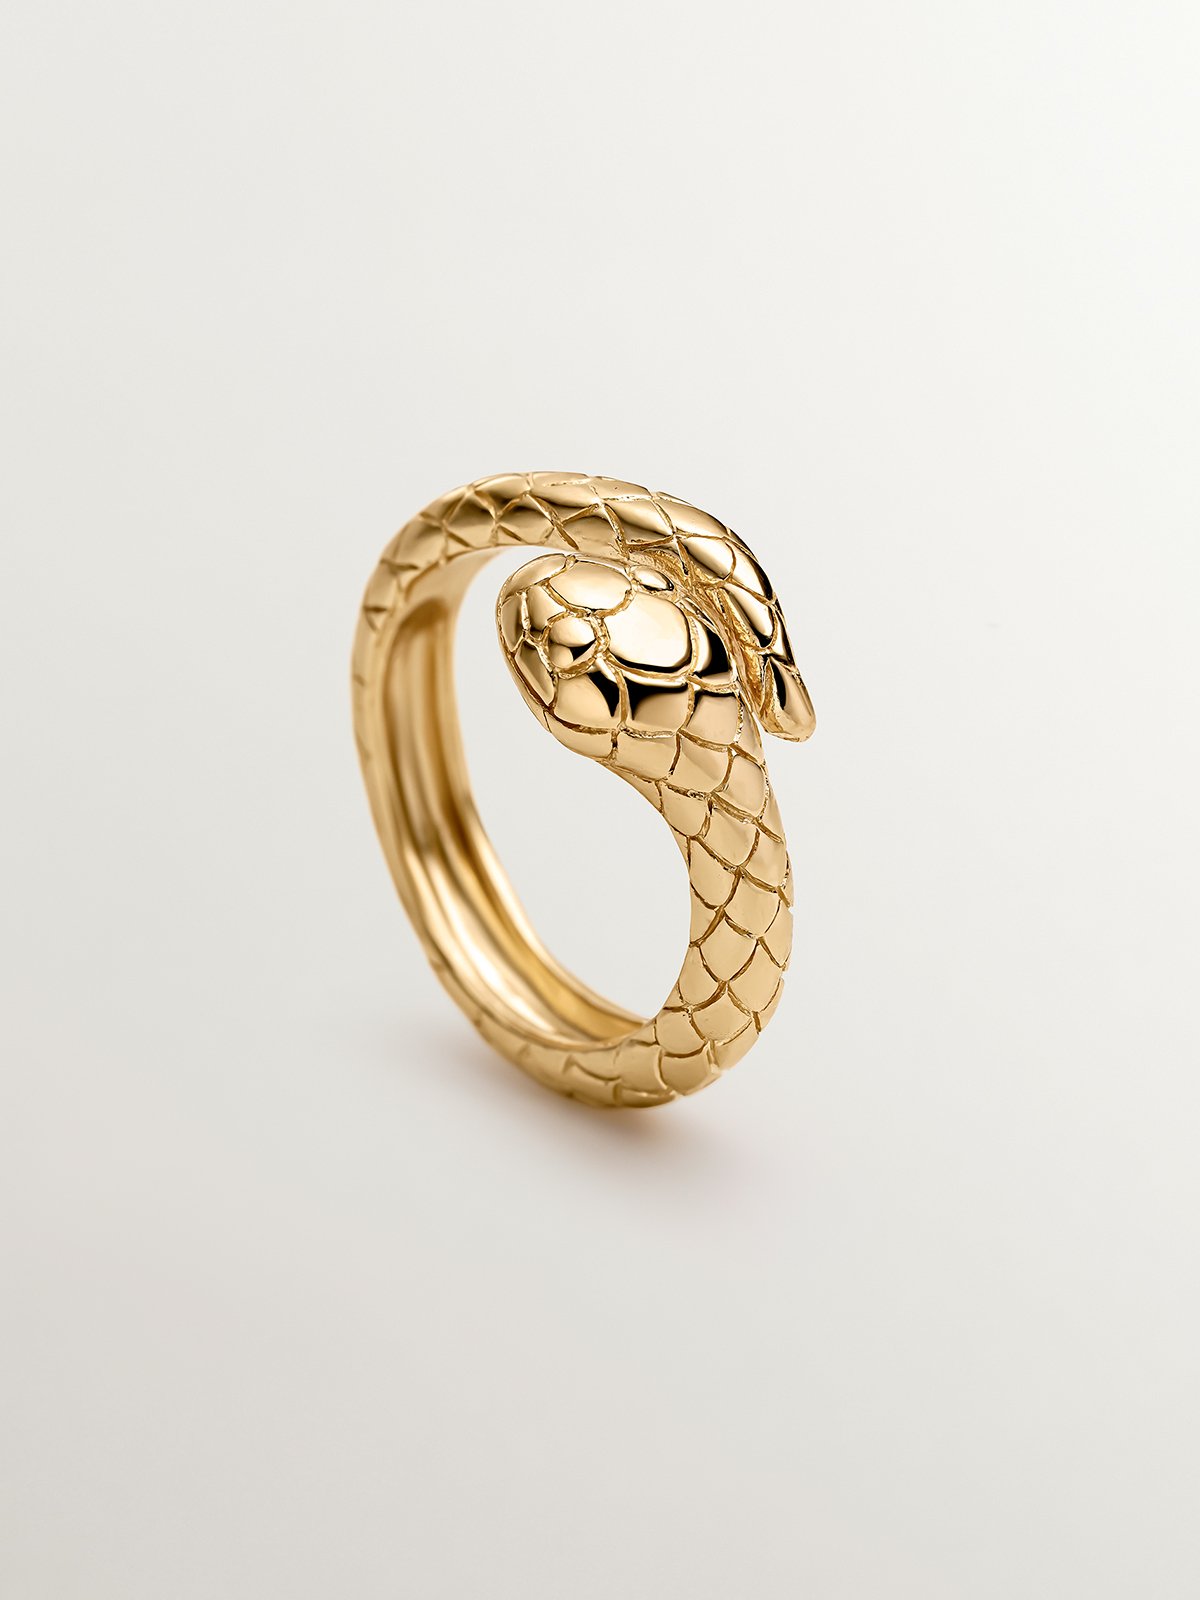 925 Silver ring bathed in 18K yellow gold in the shape of a snake